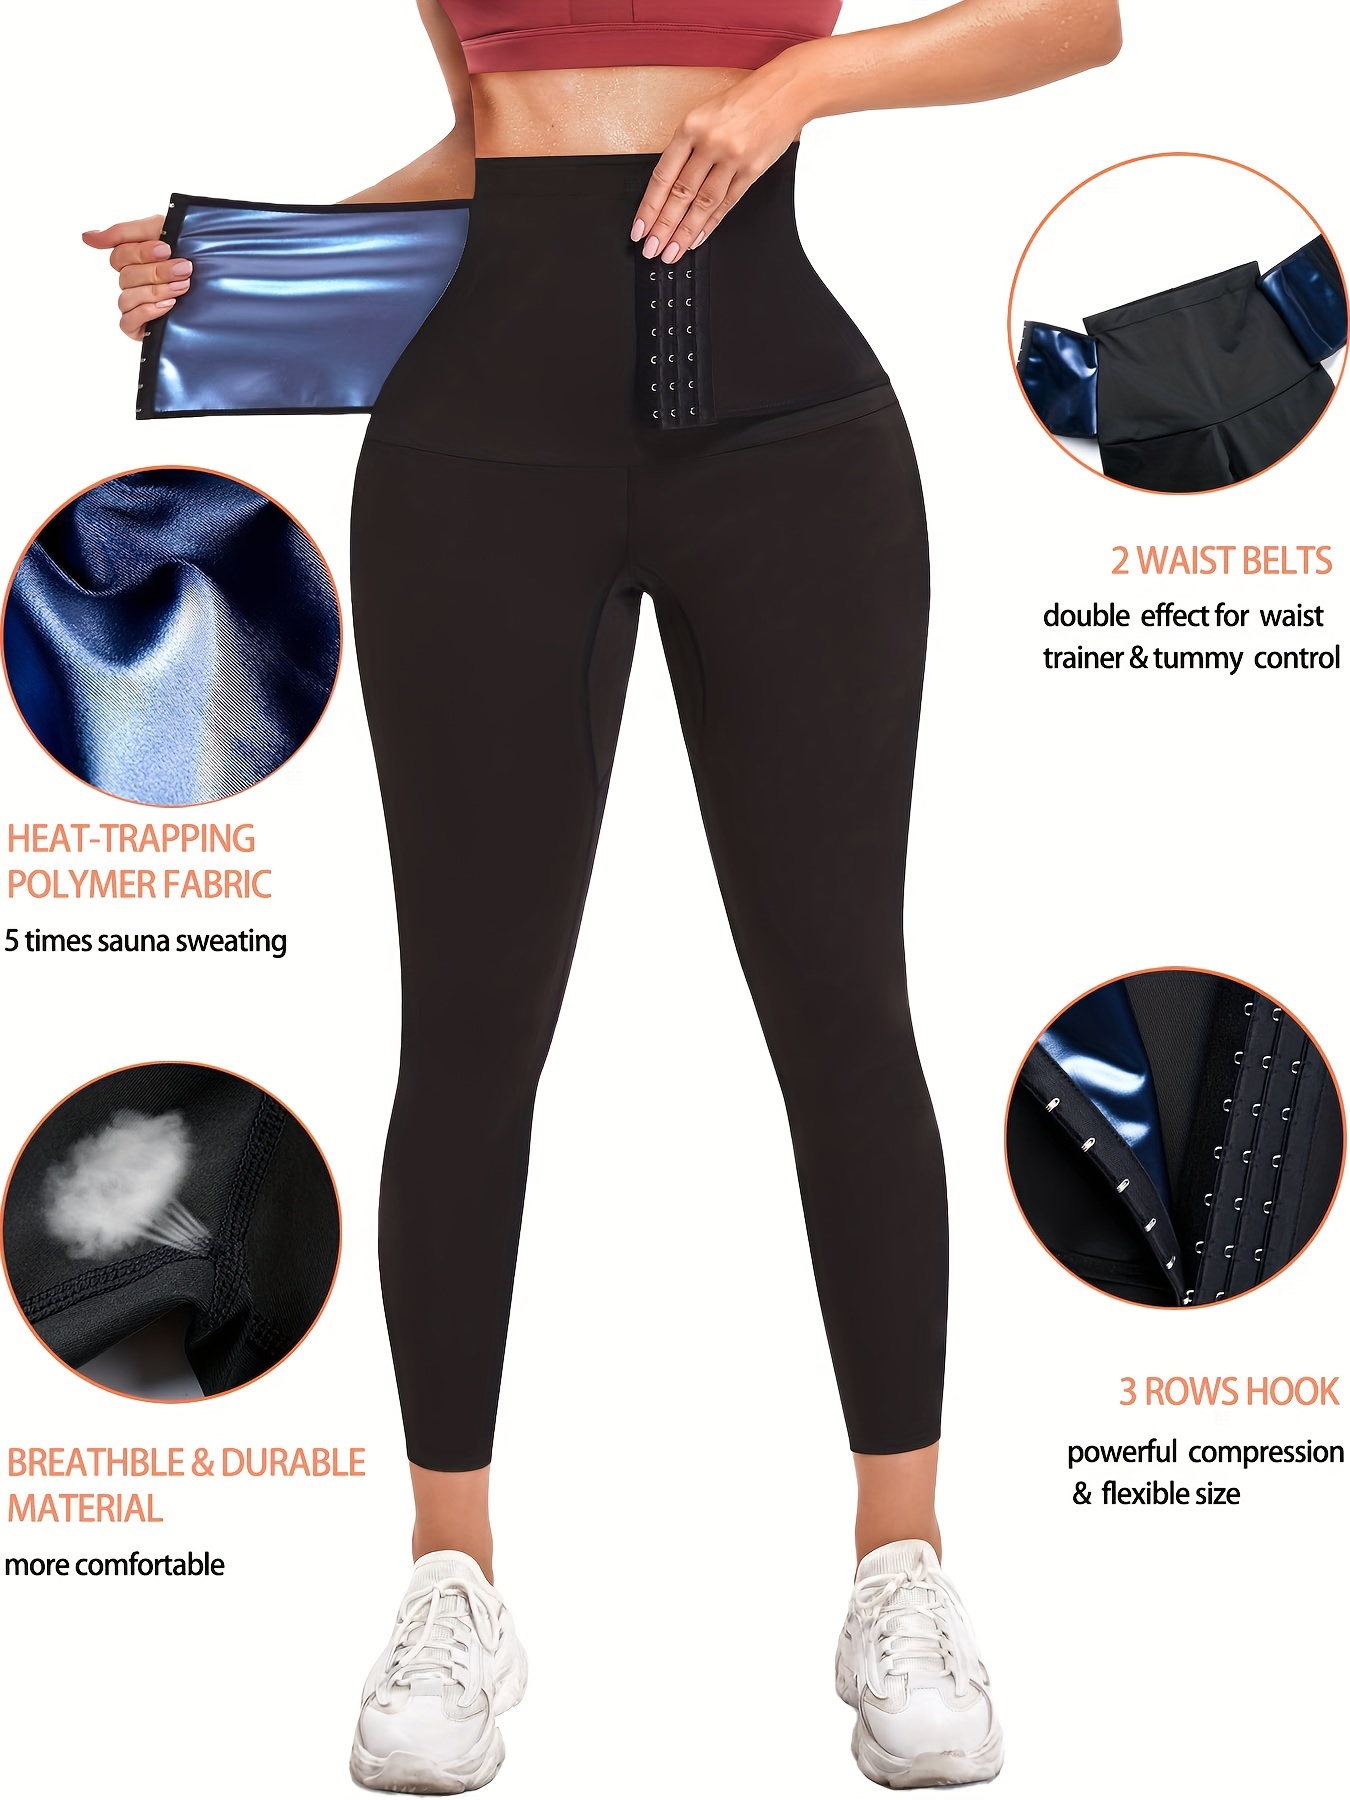 Thermo Sweat Womens Sauna Black Leggings With Pockets Slimming Body Shapers  For Gym And Workouts From Chensuiqz, $14.13